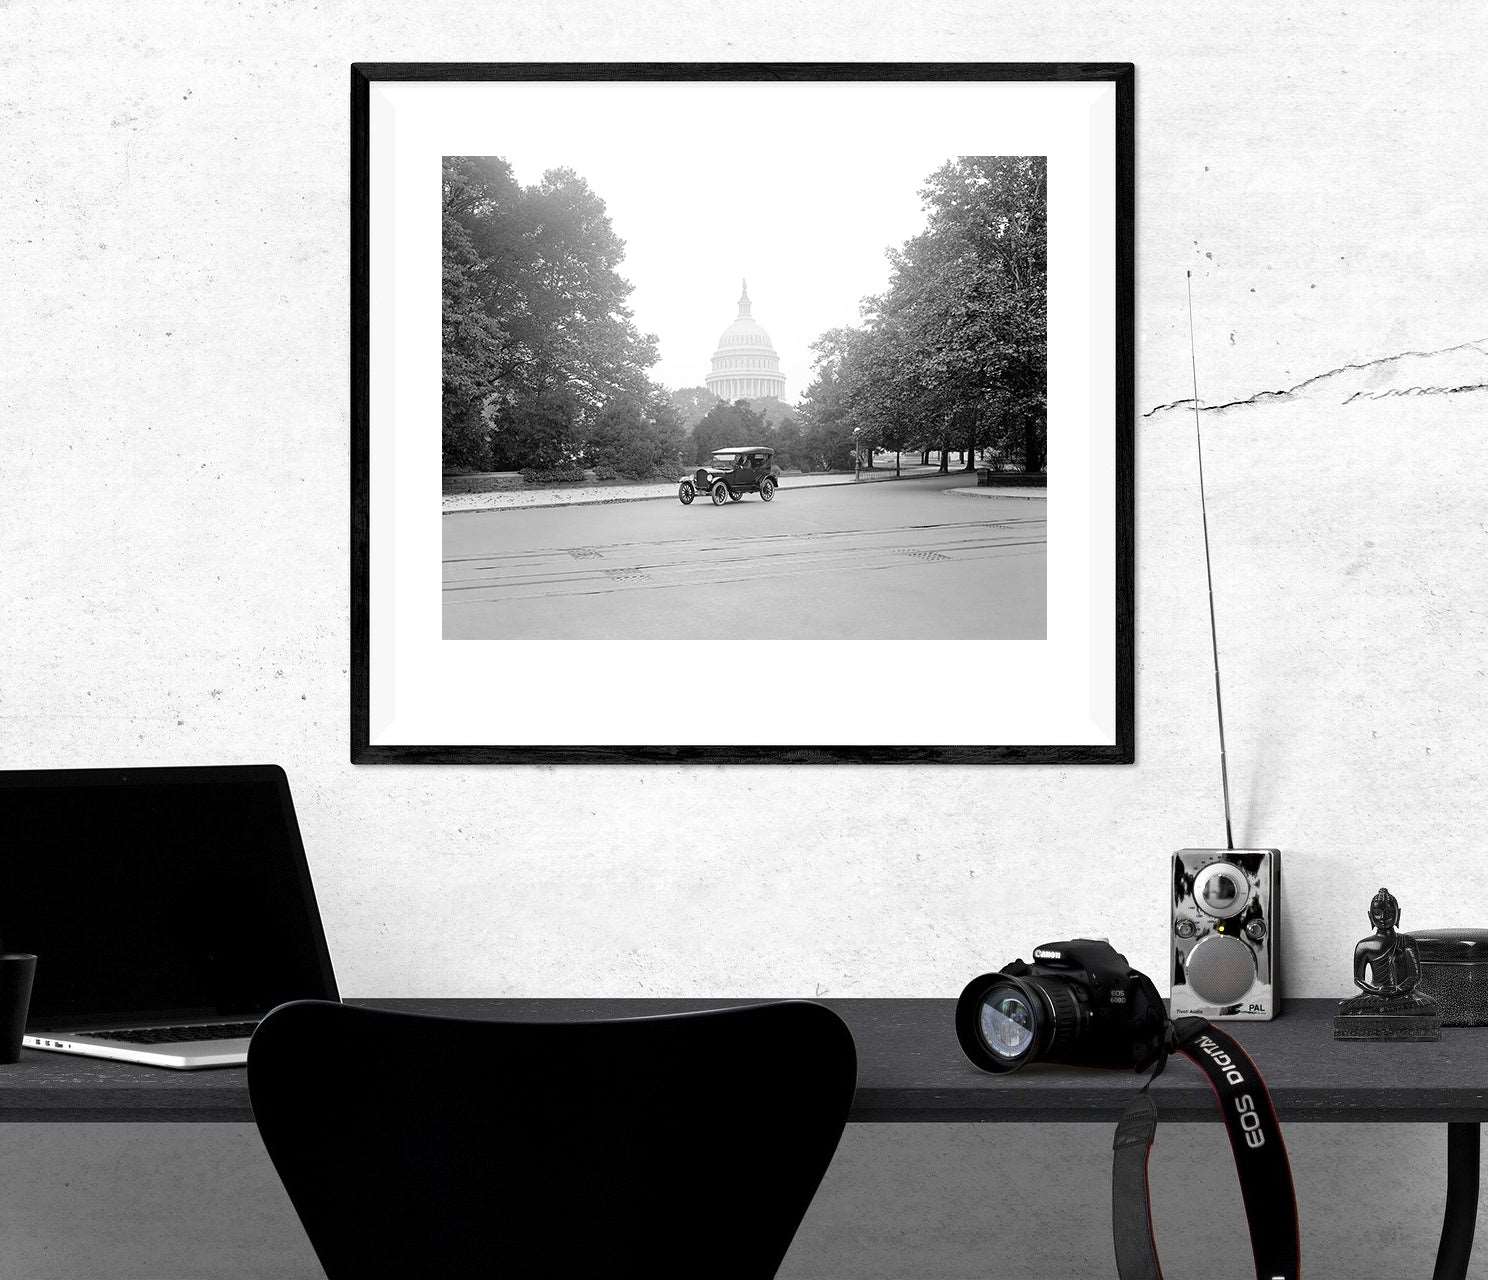 A framed paper print of a vintage photograph of a Ford Touring Car in Washington DC hanging above a desk